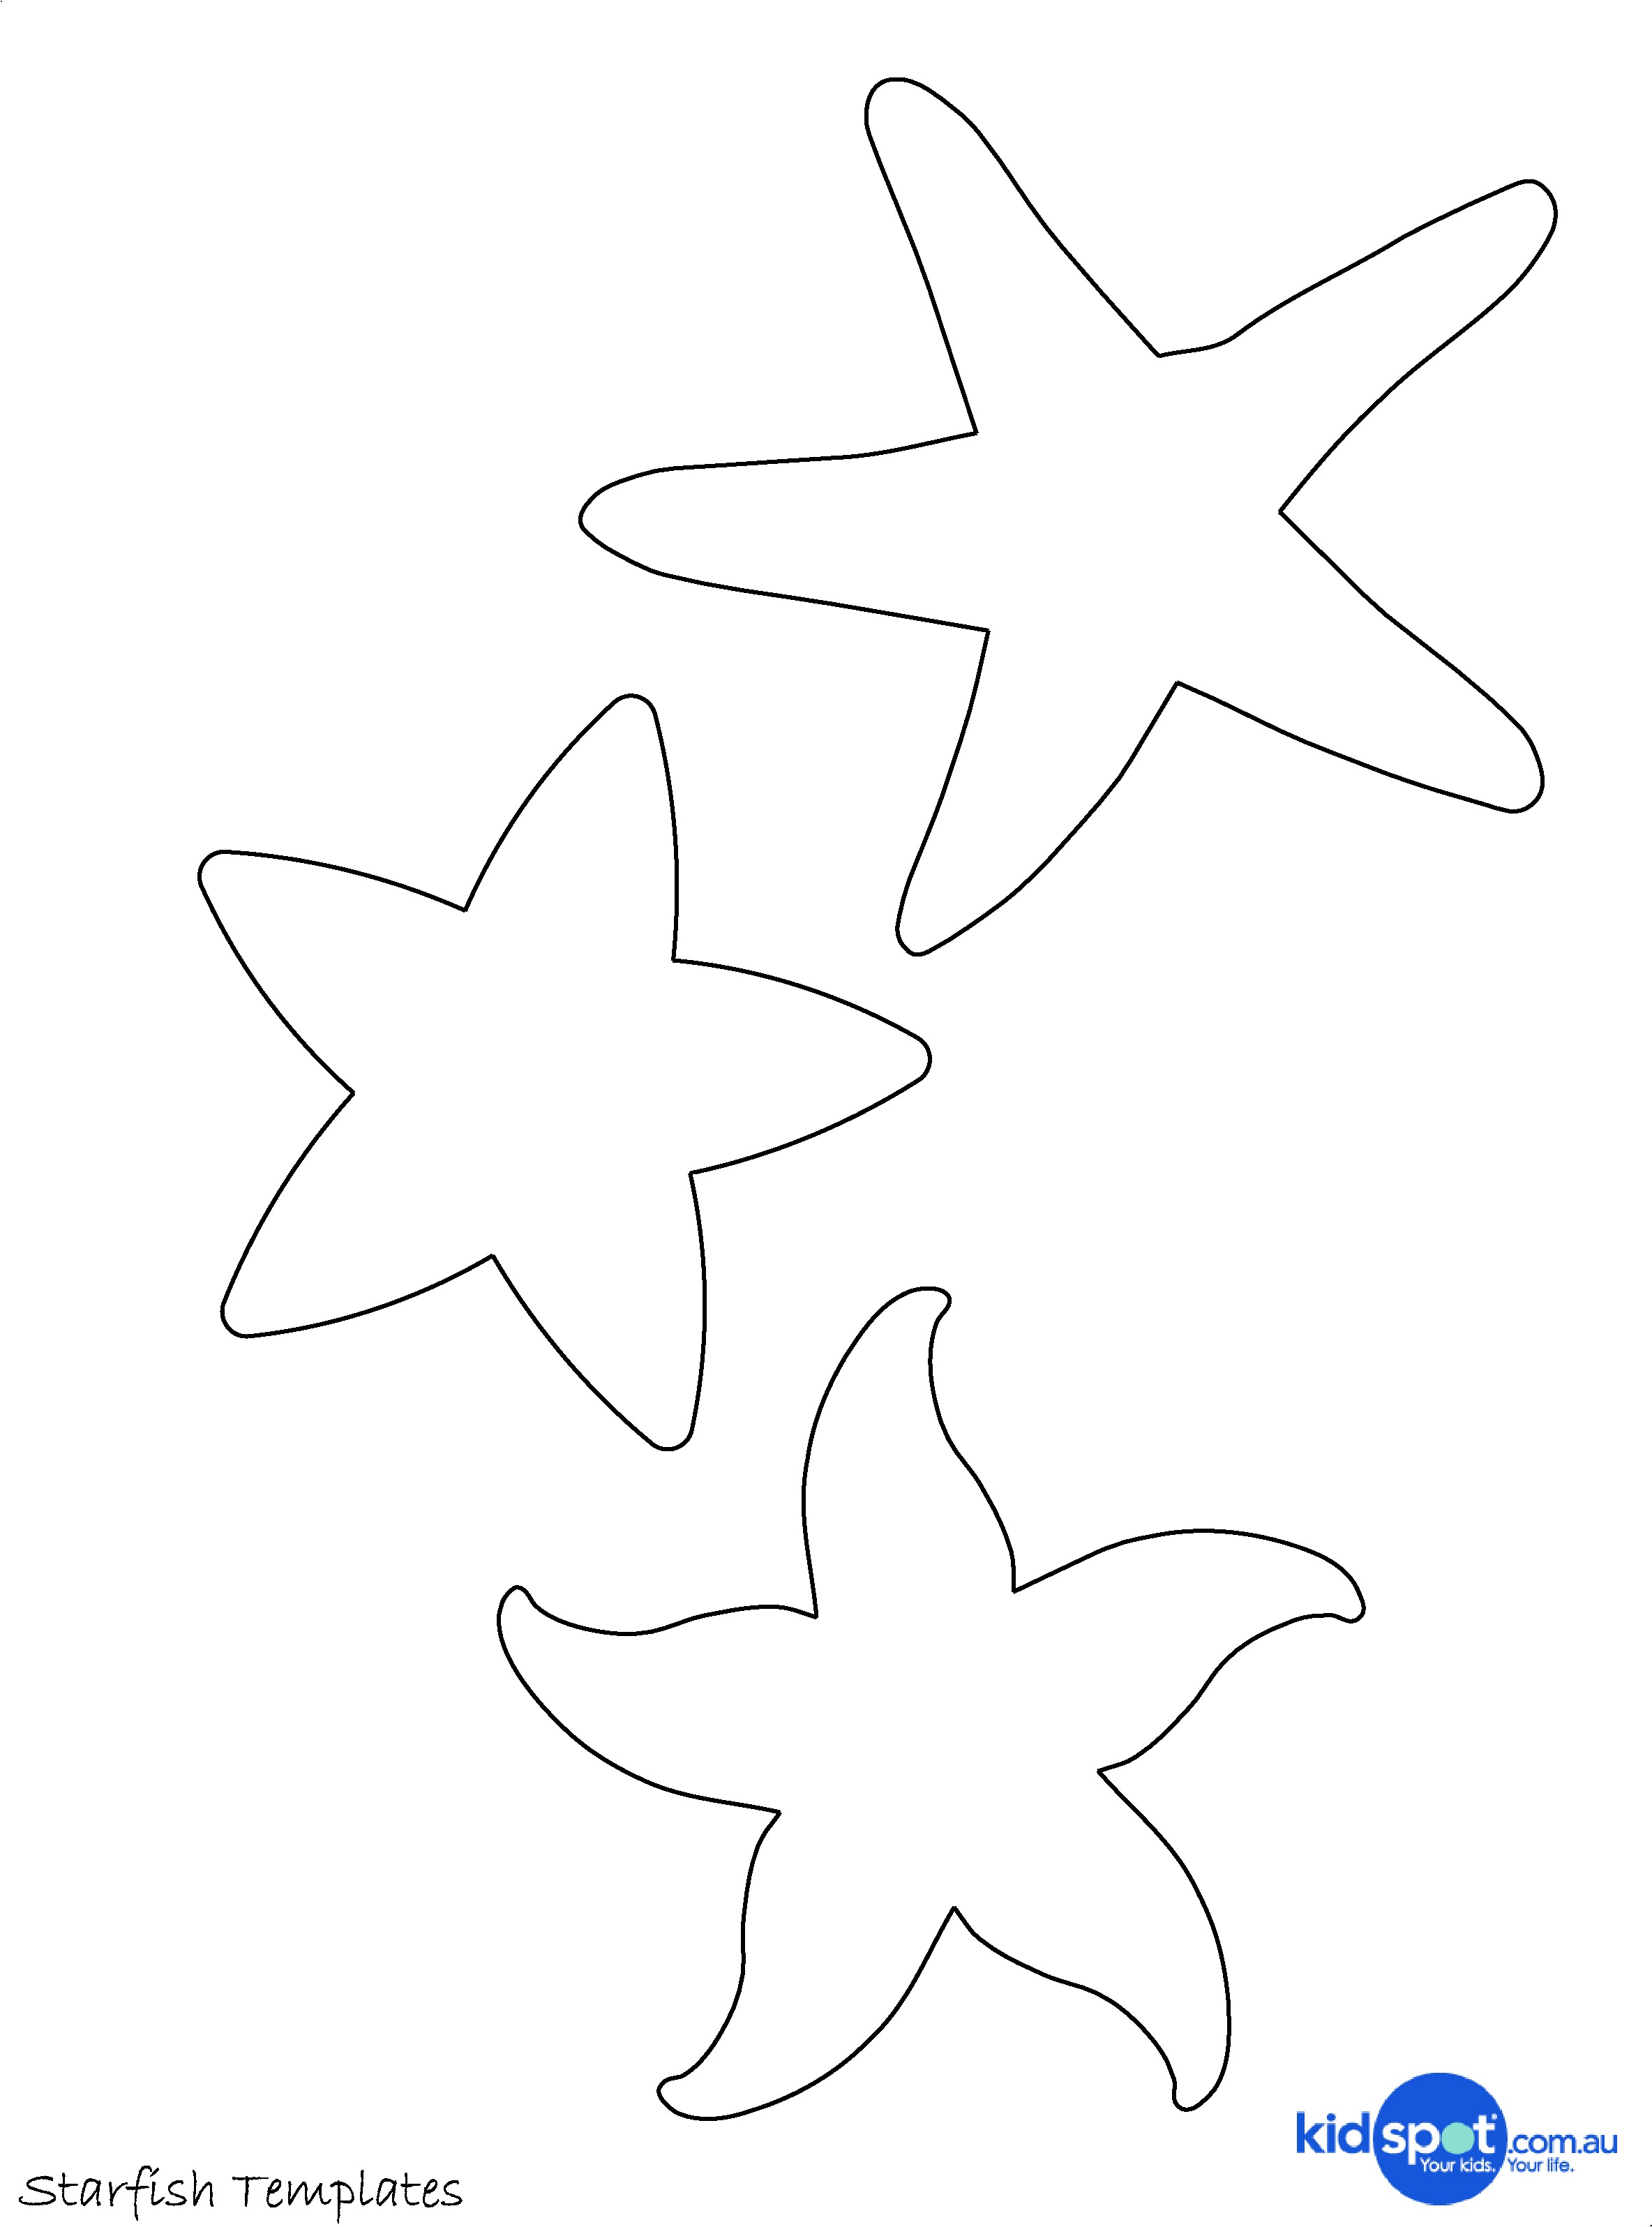 Free Starfish Template, Download Free Clip Art, Free Clip Art On - Free Printable Sea Creature Templates